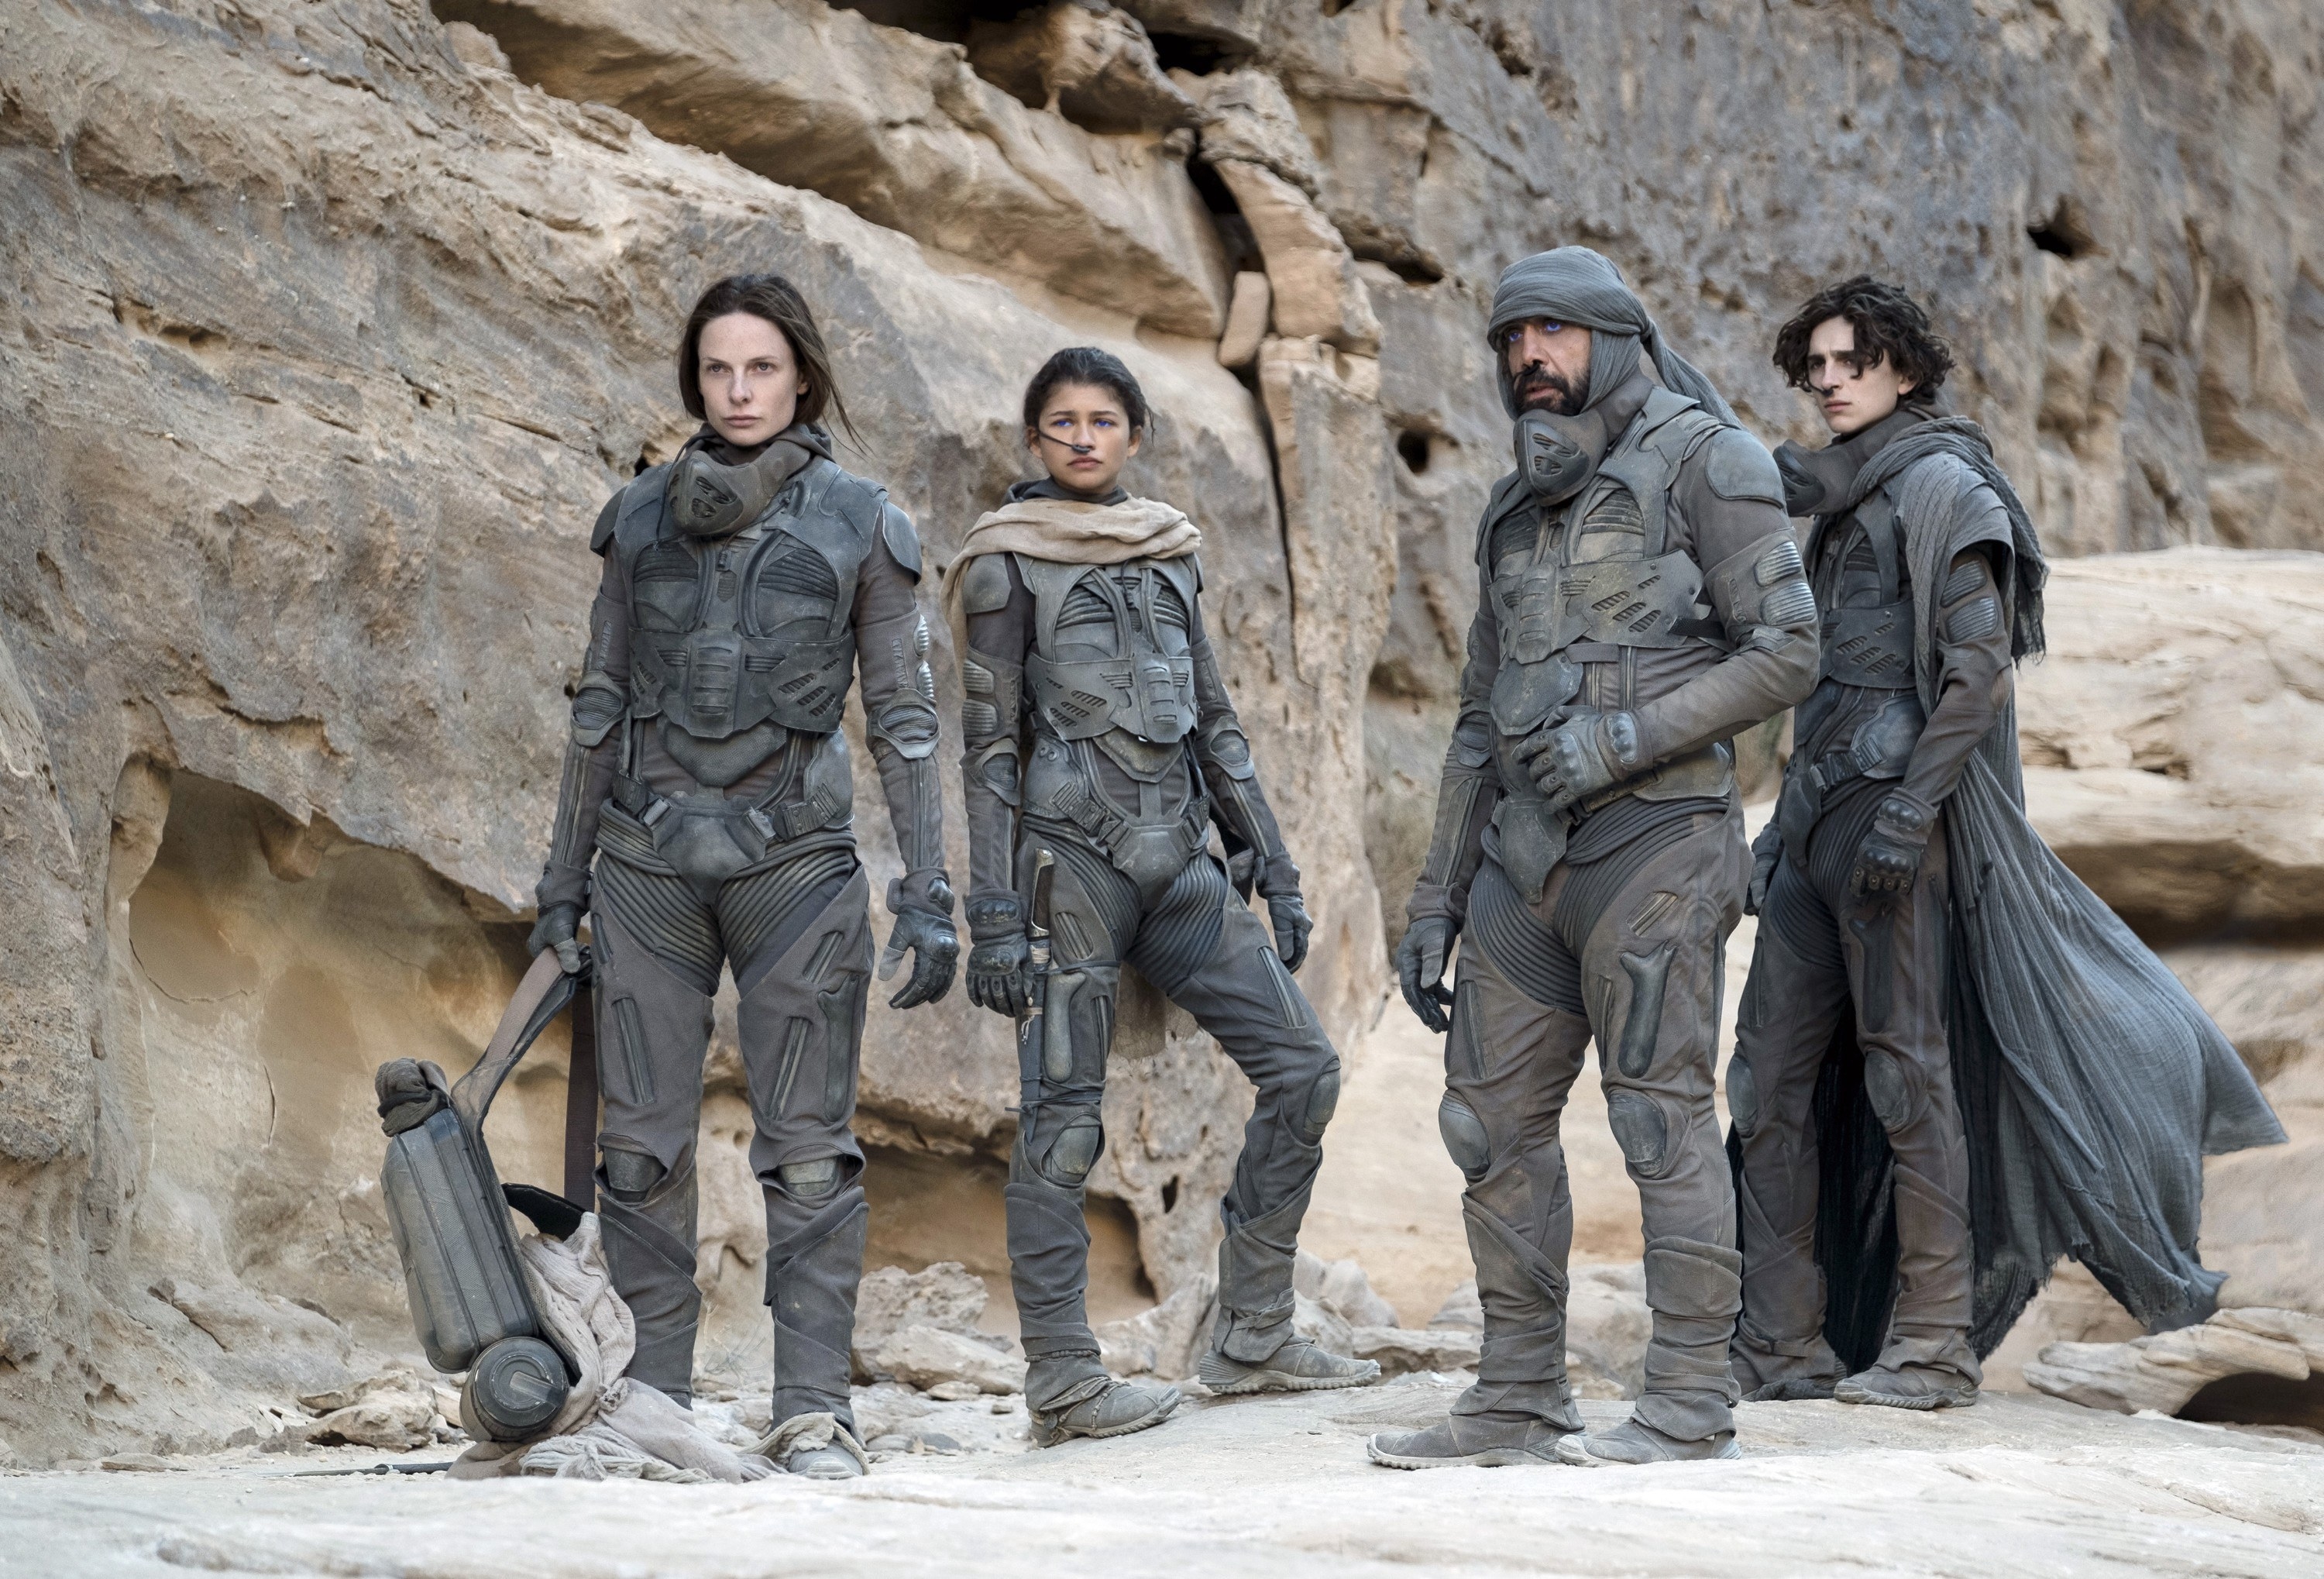 Jessica, Chani, Stilgar, and Paul, in survival suits, standing in a large rock formation looking out at something